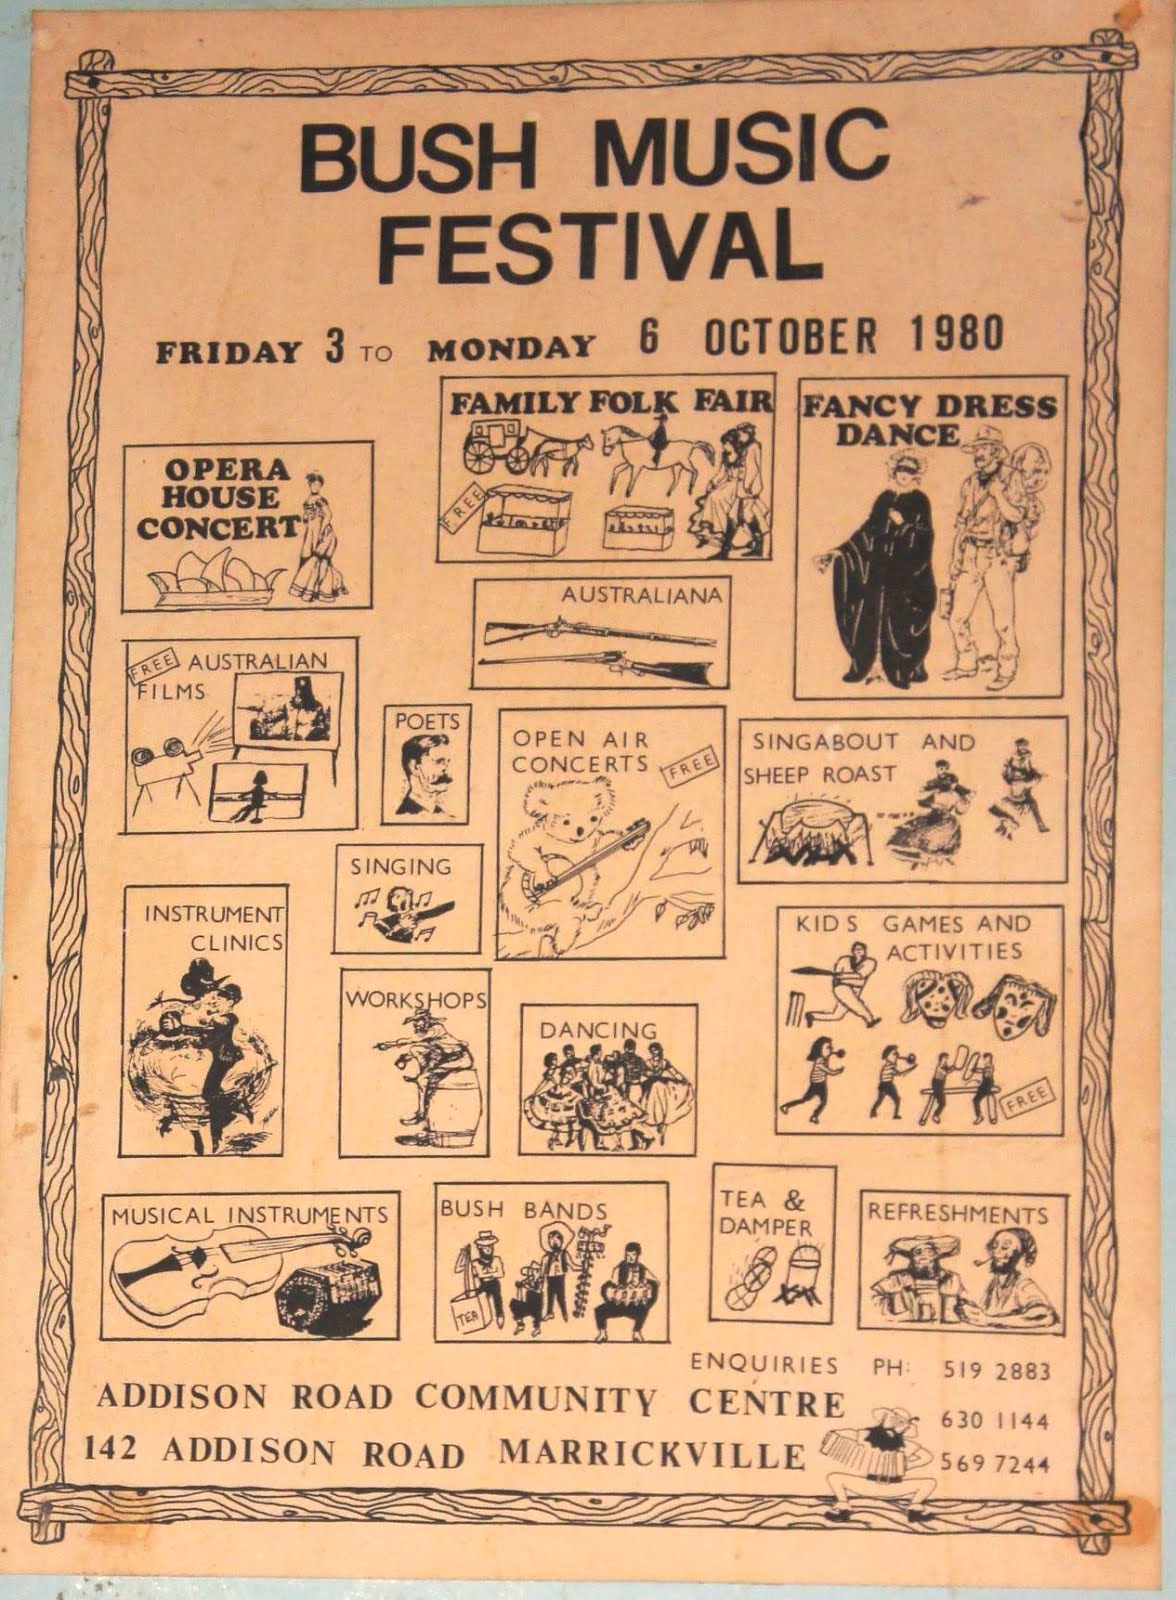 Club: From the Archives - 1980 Bush Music Festival program, posters & other ephemera